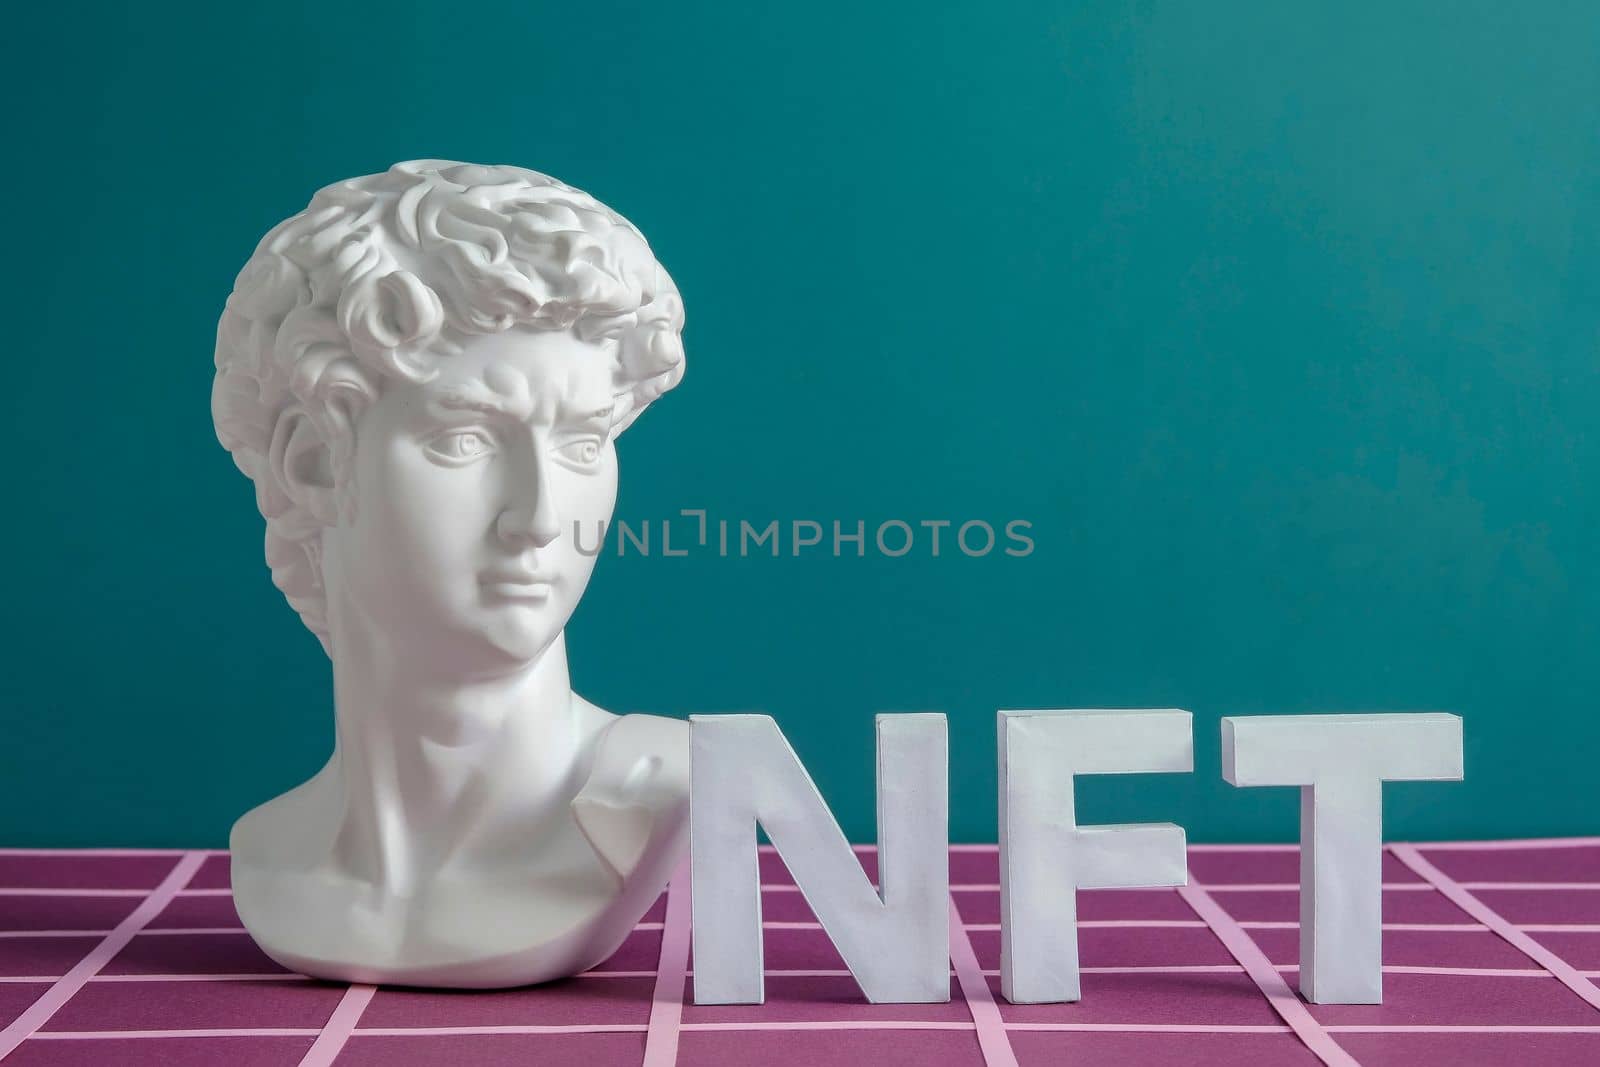 David and NFT token in vaporwave style with copy space as a minimal concept by sergii_gnatiuk